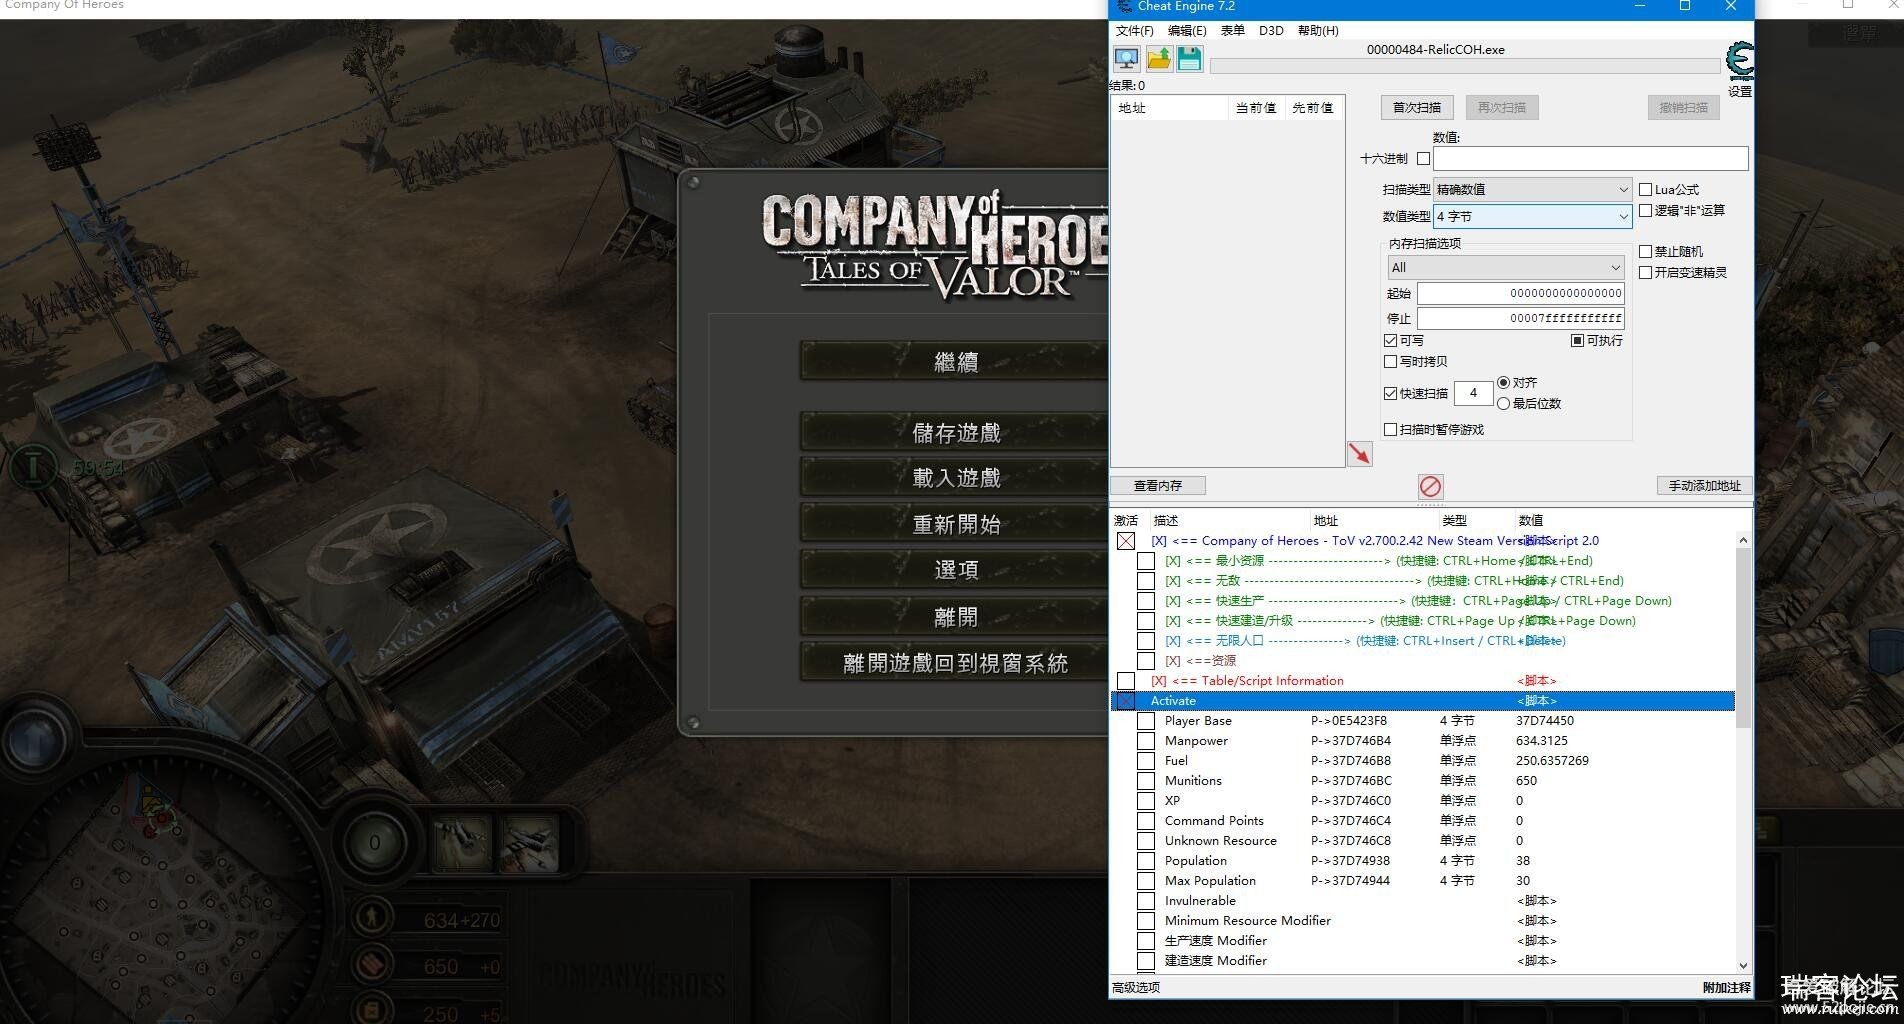 Company of Heroes Complete EditionӢ˵ذ v2.700.2.42-6.jpg